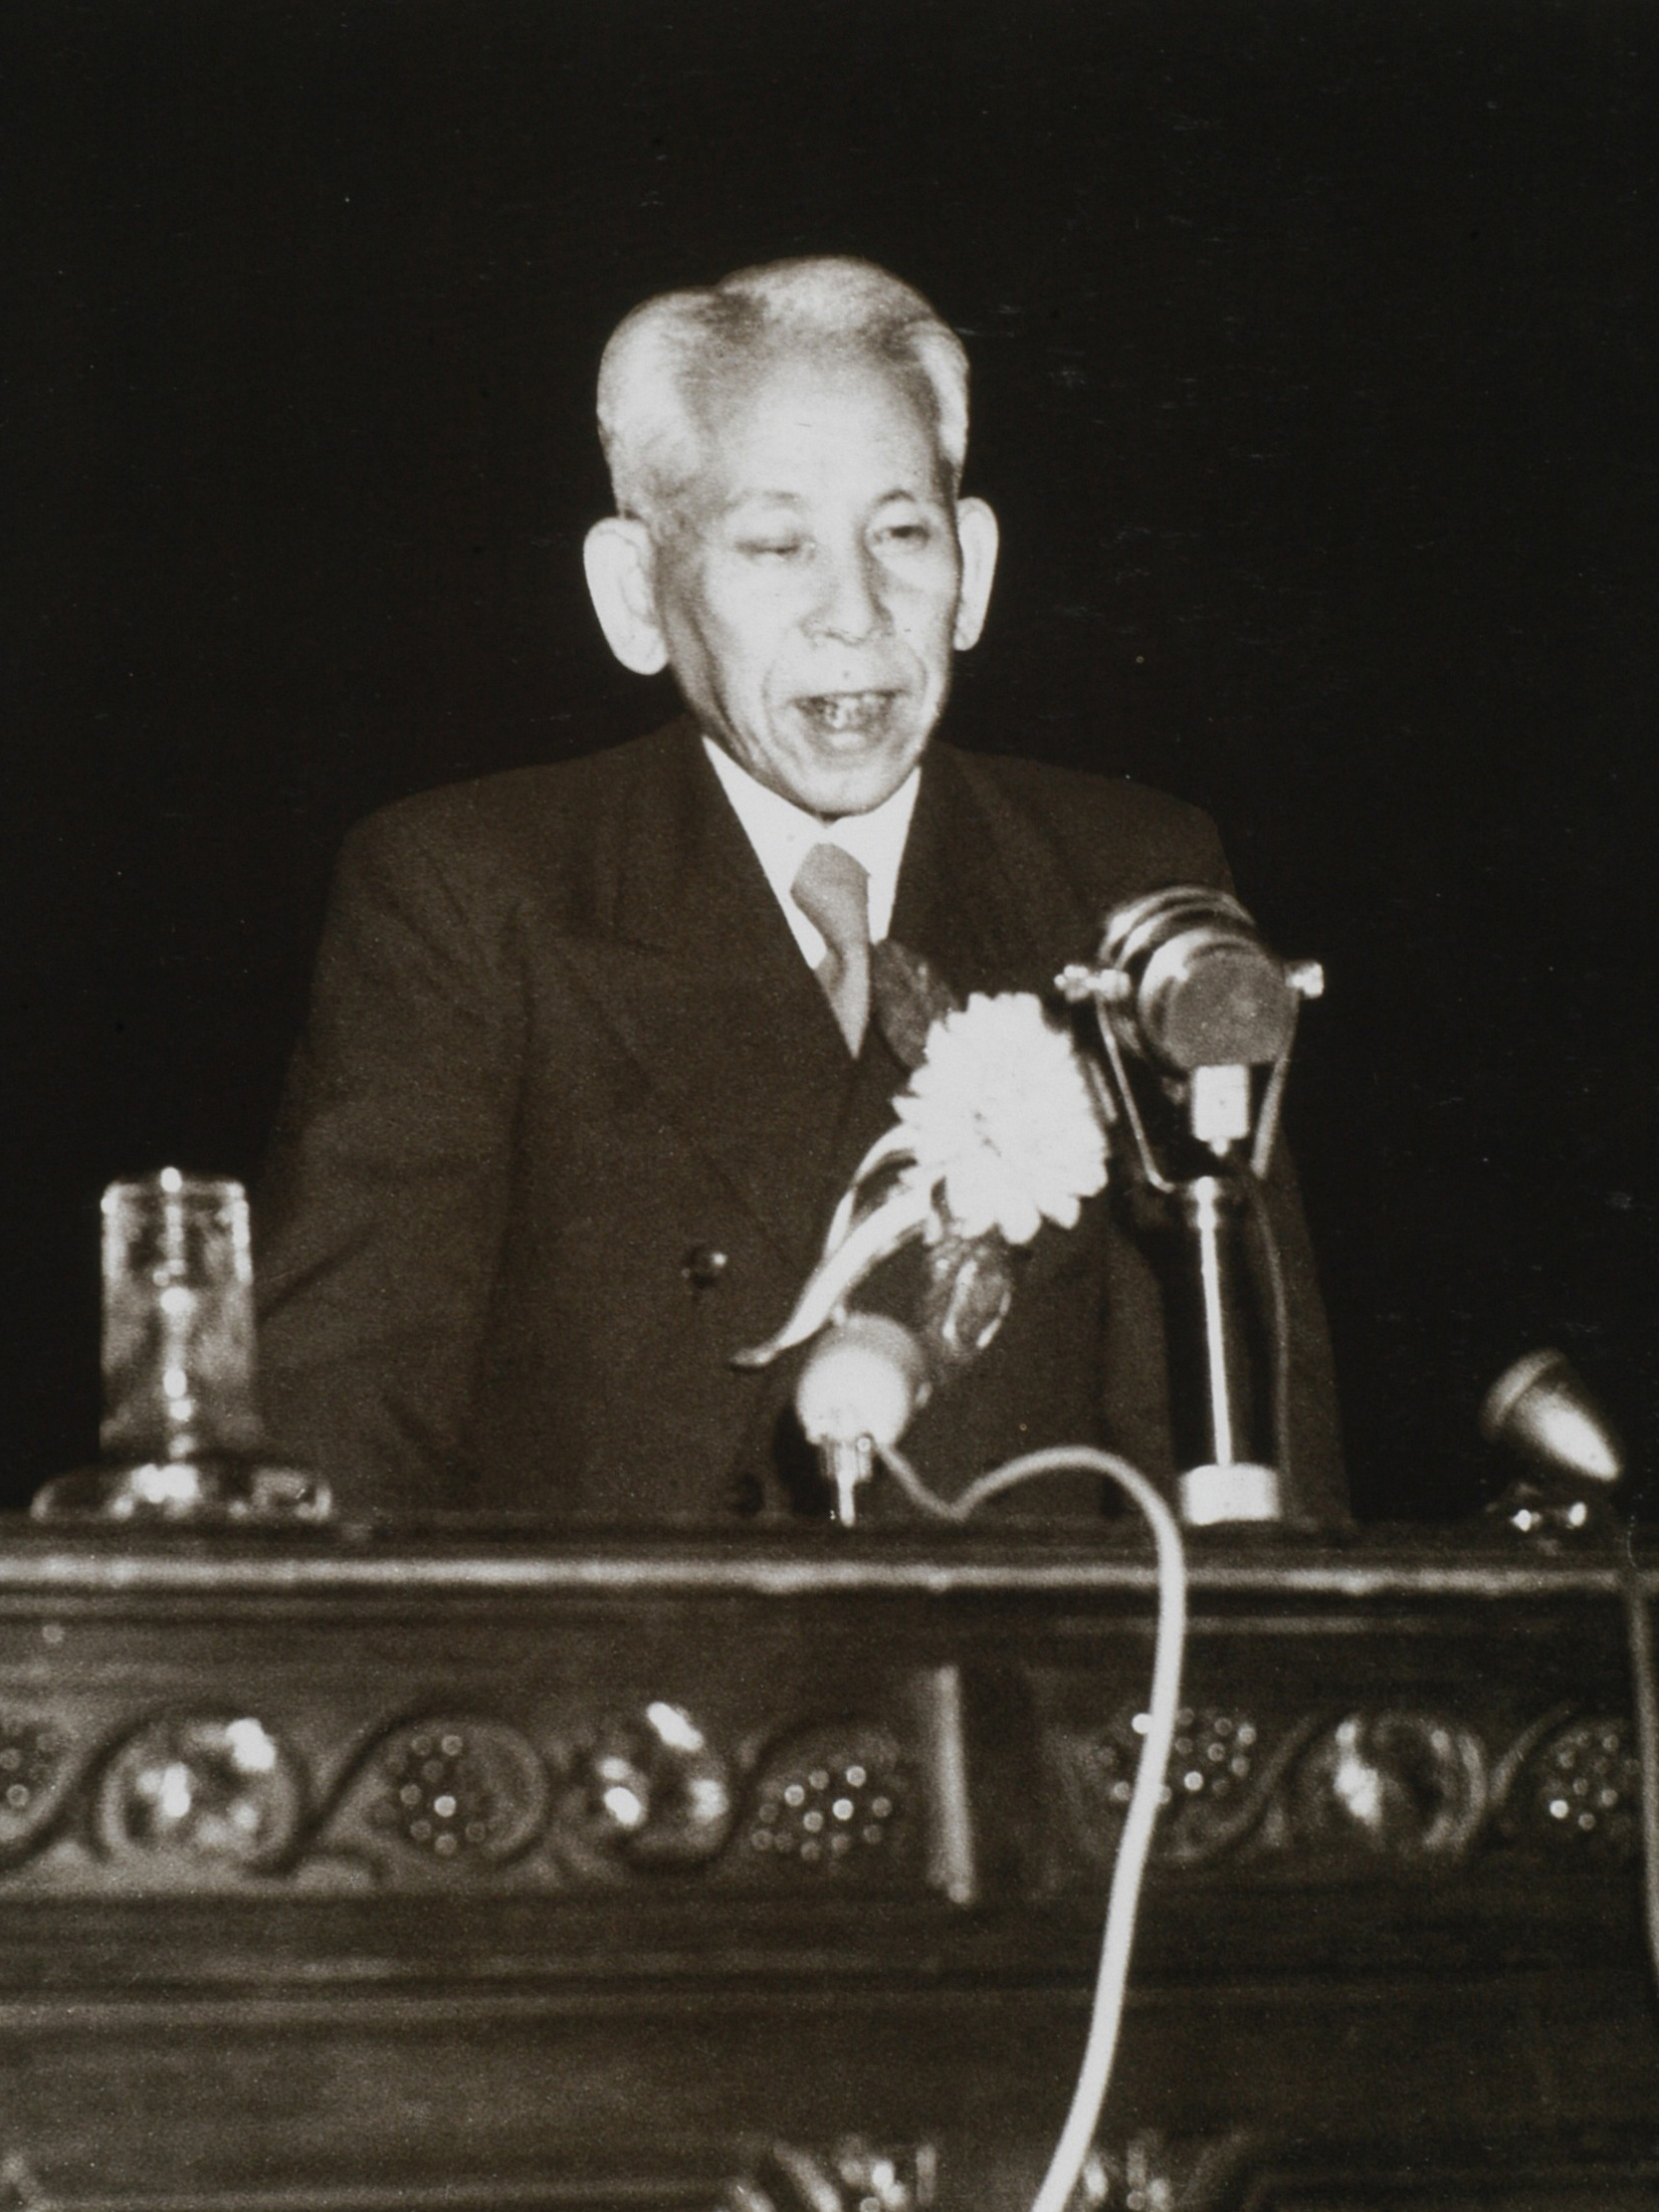 Giving a passionate lecture on the world of true civilization (Hibiya Public Hall in Tokyo, May 22, 1951)